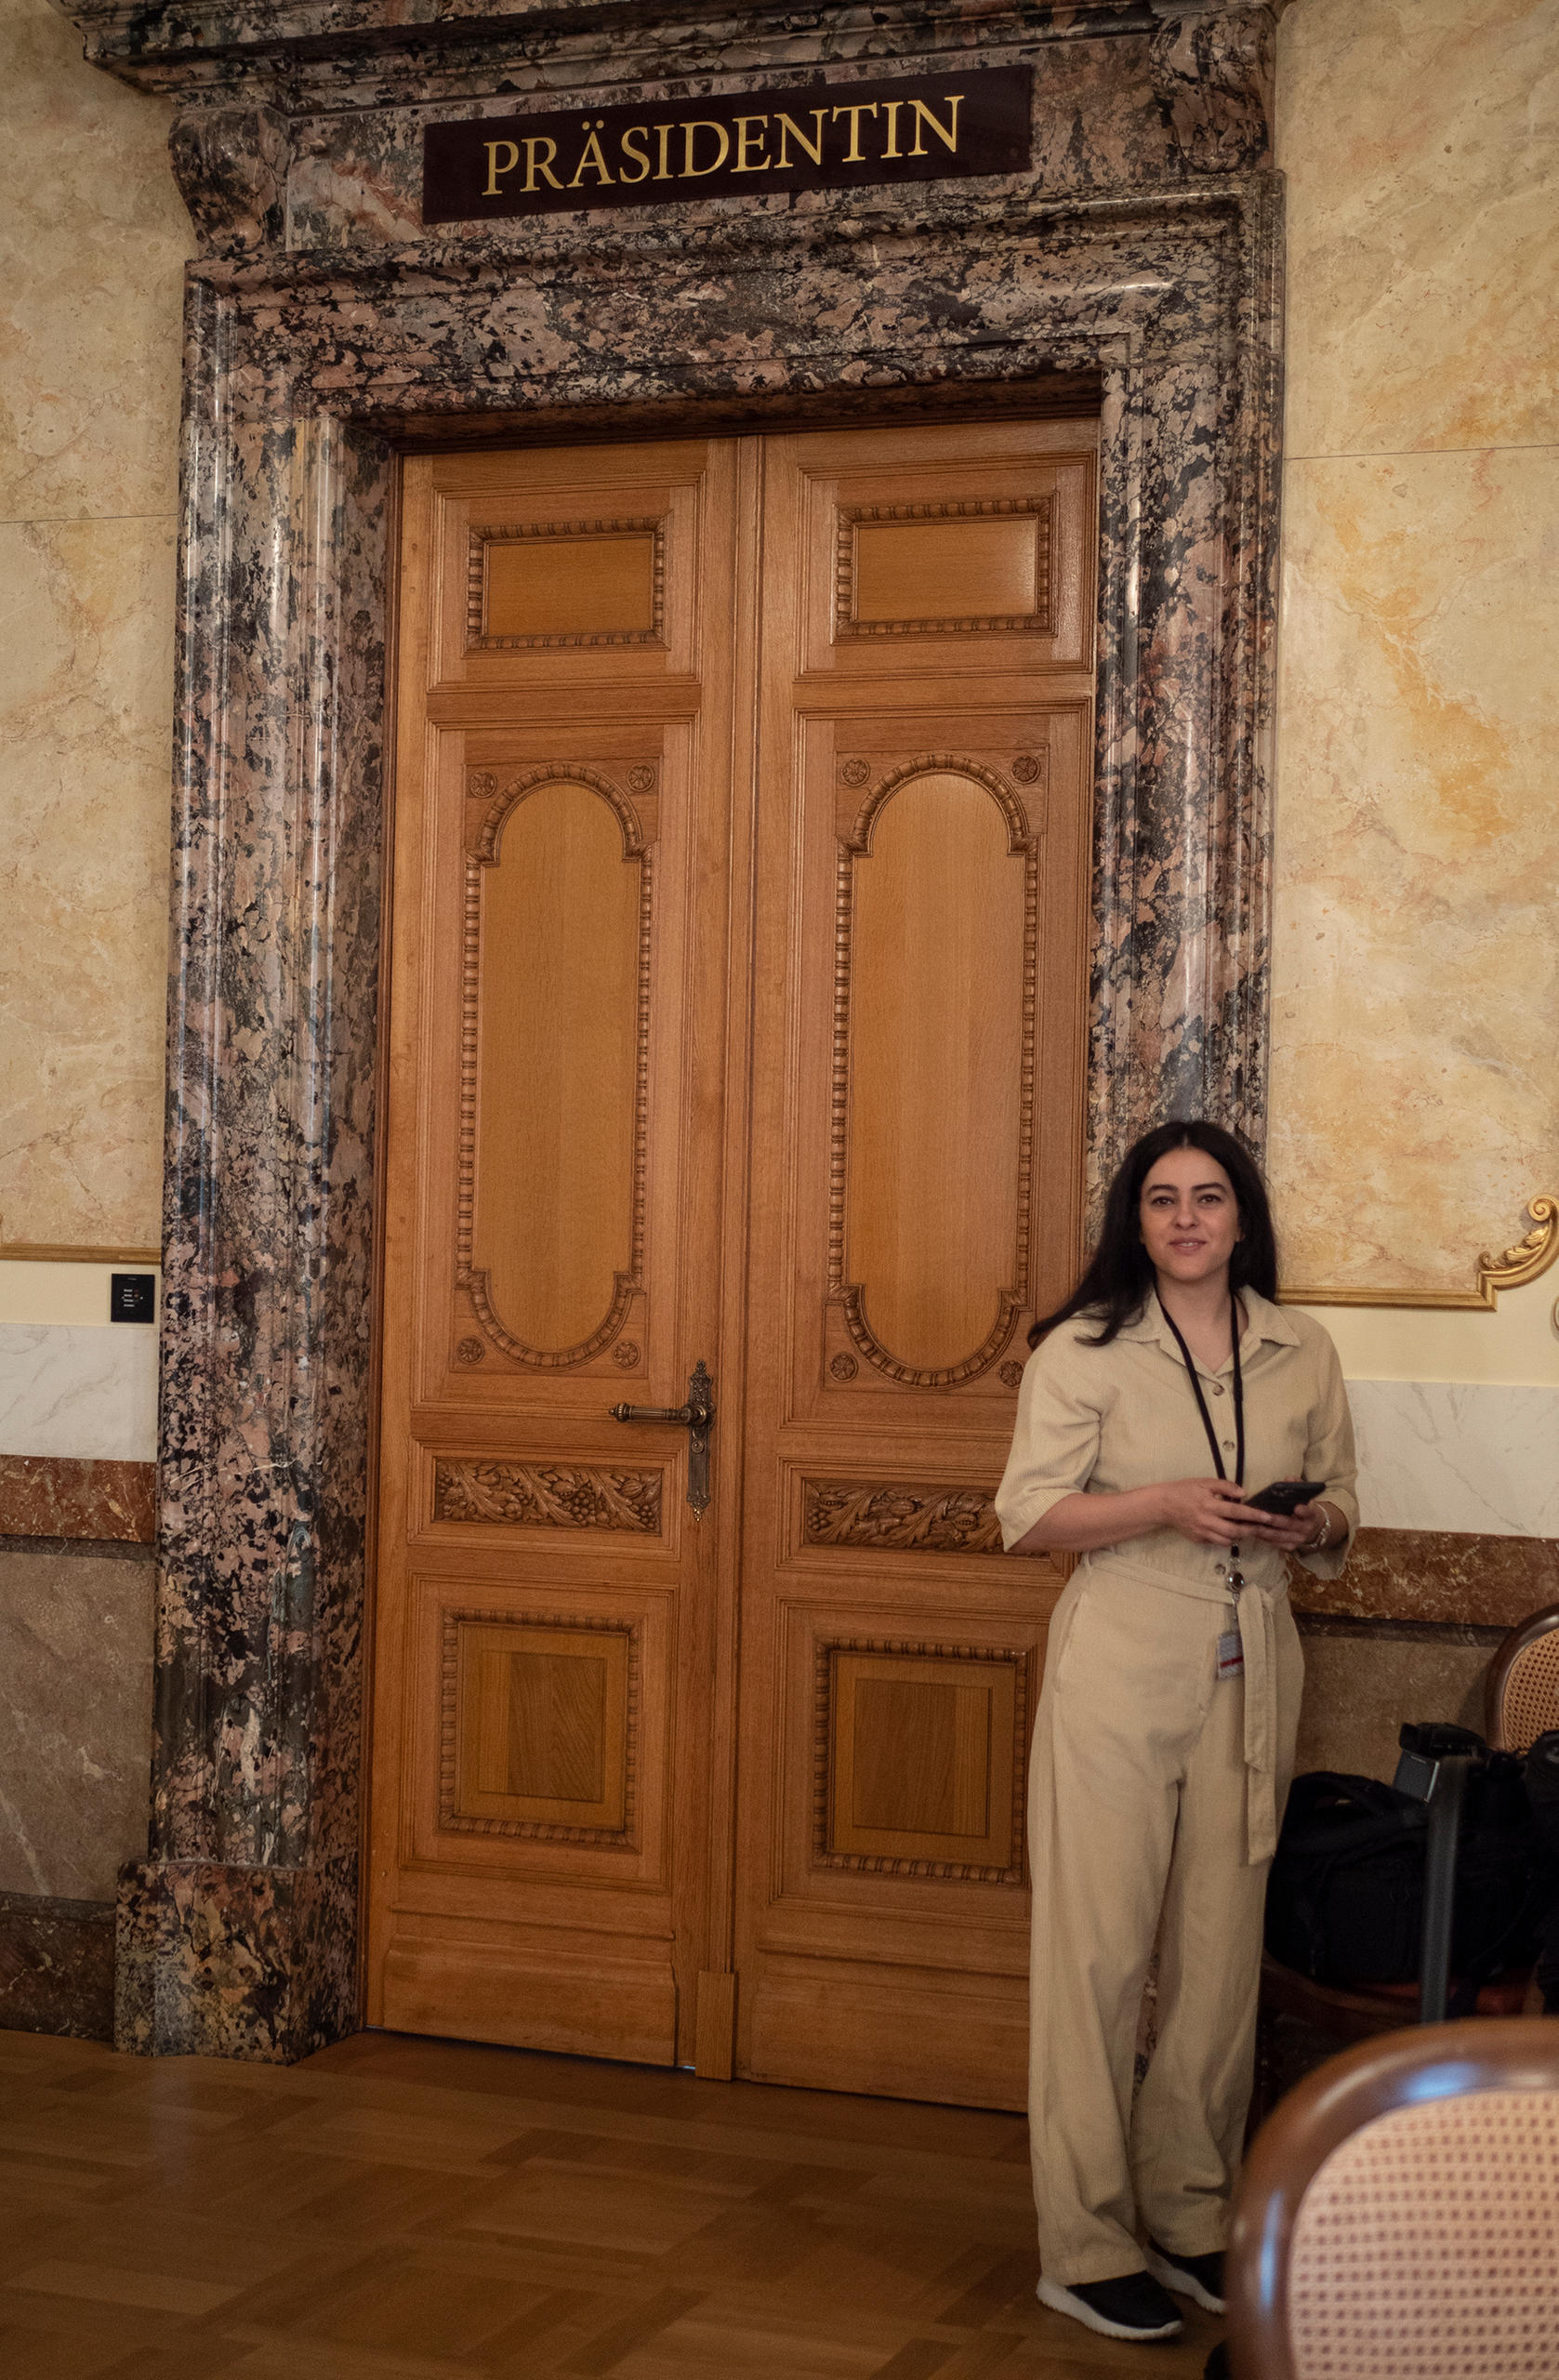 Newsha Tavakolian at the door of the office of the president of the Swiss parliament